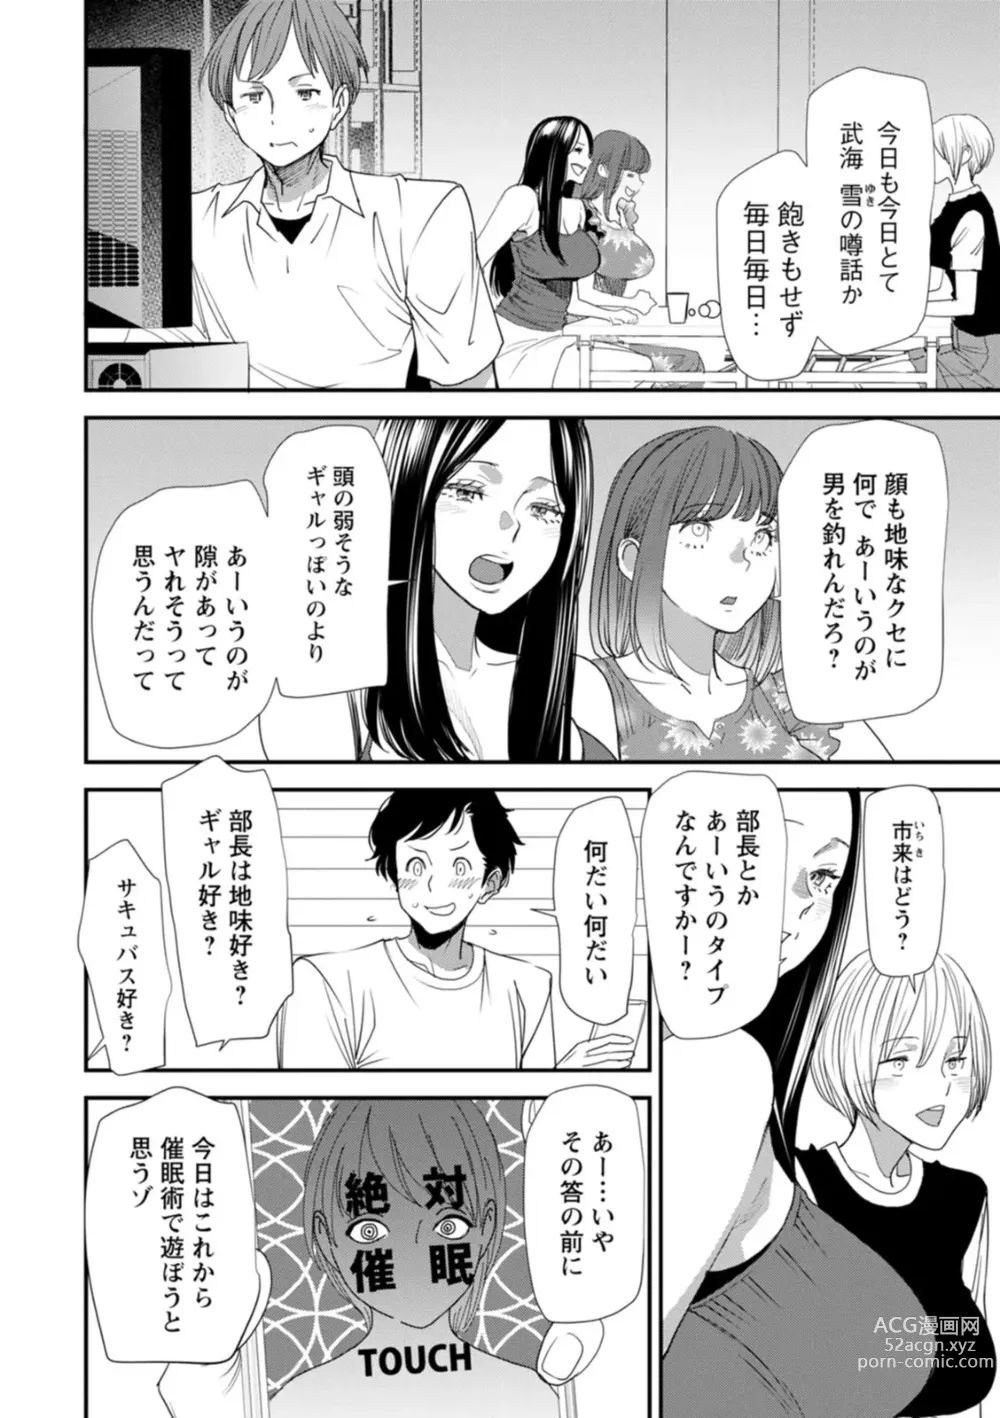 Page 24 of manga Inma Joshi Daisei no Yuuutsu - The Melancholy of the Succubus who is a college student